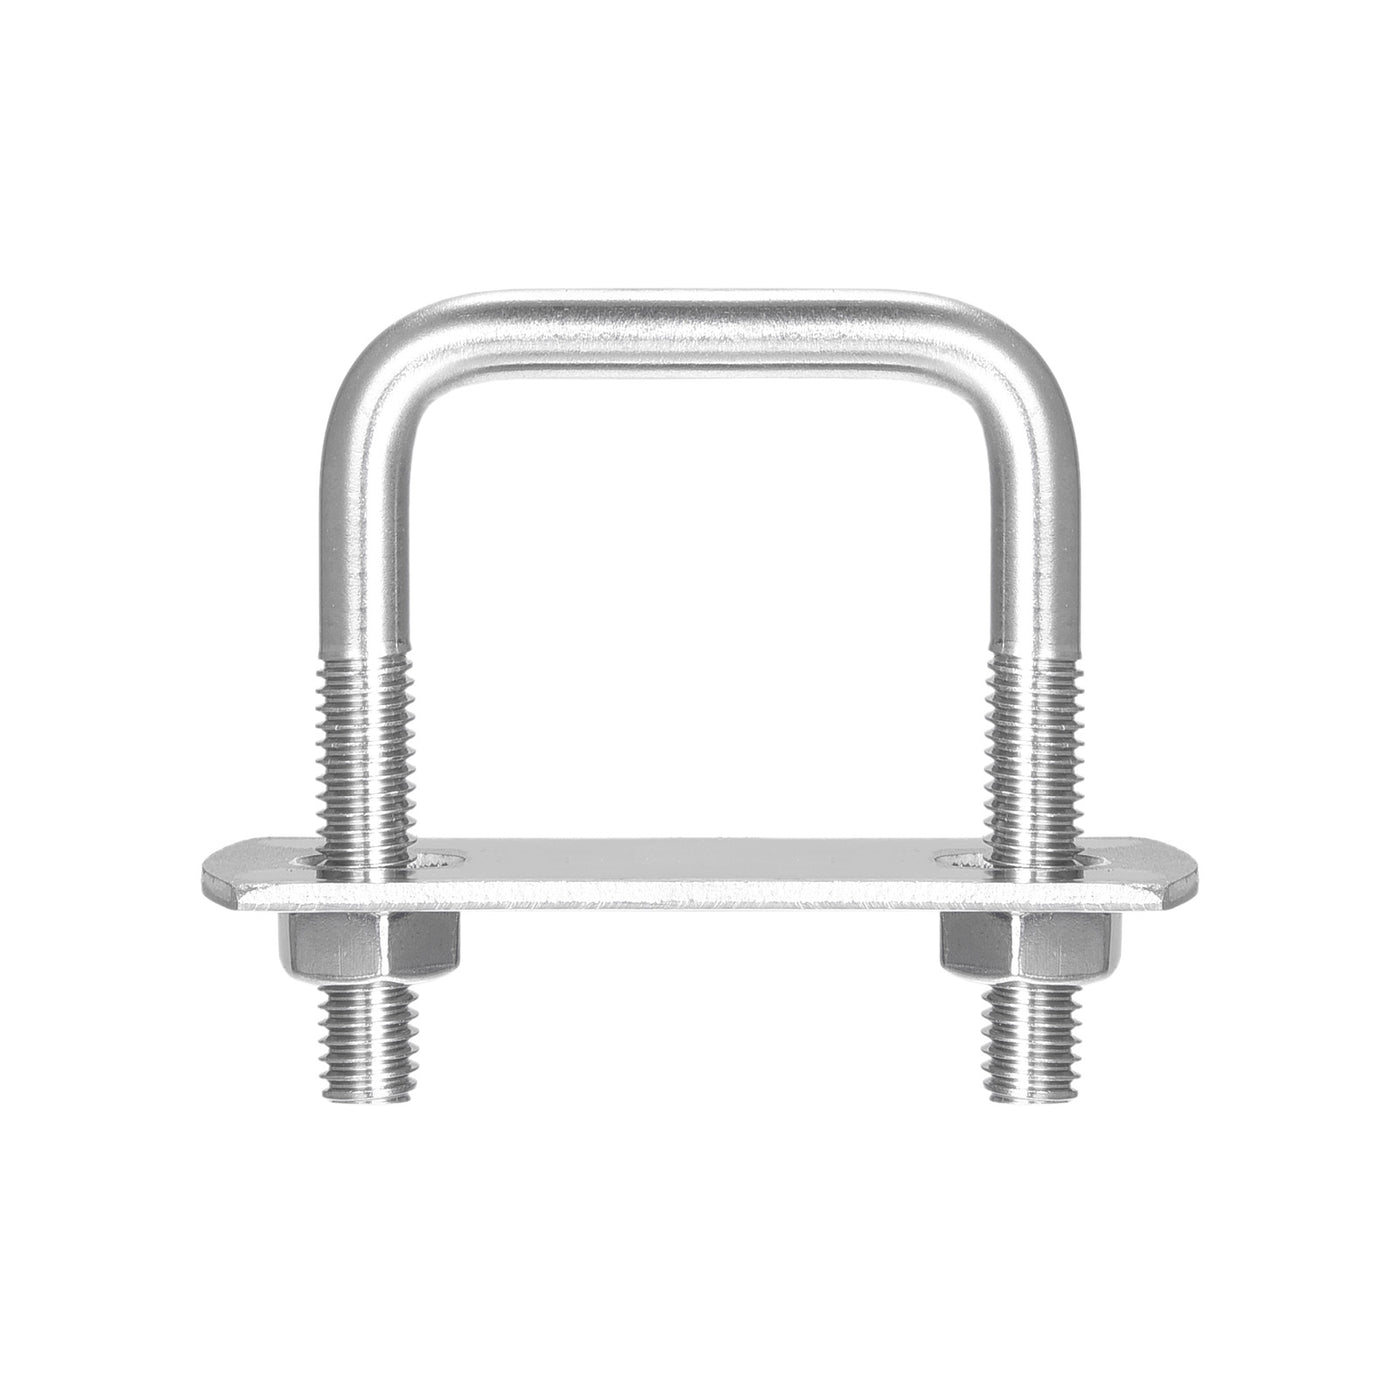 Uxcell Uxcell Square U-Bolts, 10 Sets 32mm Inner Width 46mm Length M6 with Nuts and Plates